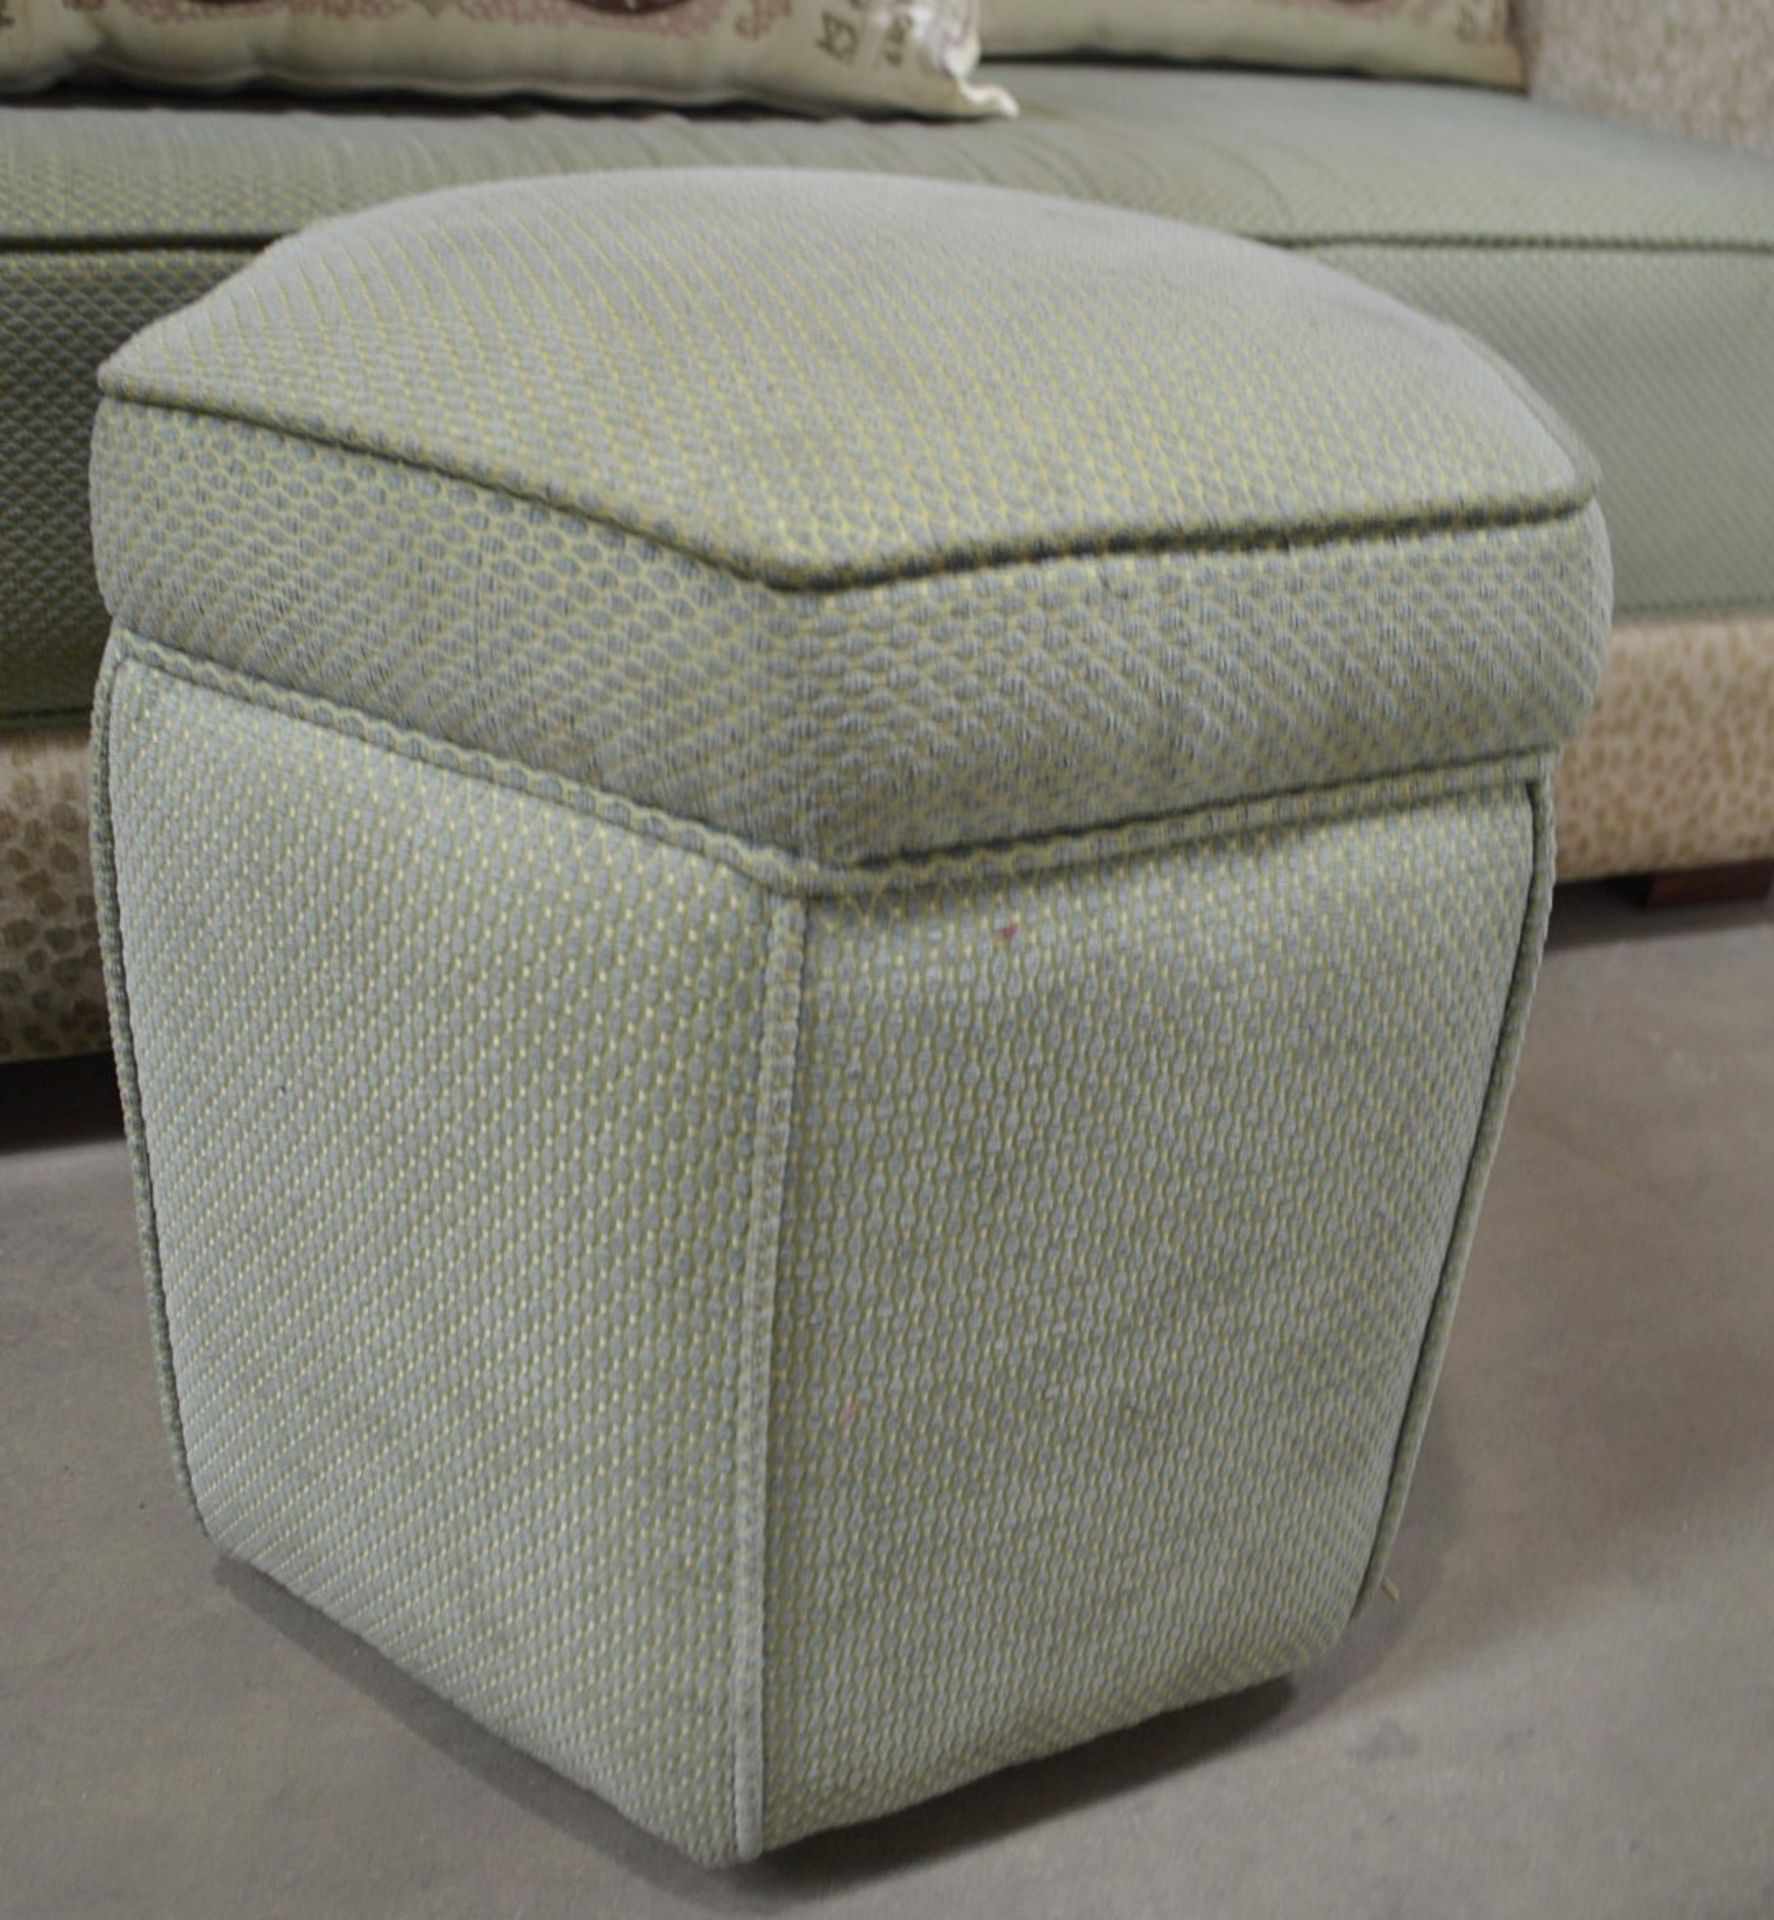 1 x Upholstered Sofa With 4 x Cushions, Pale Green Seat Cushion With Matching Footstool - Ref: - Image 5 of 7